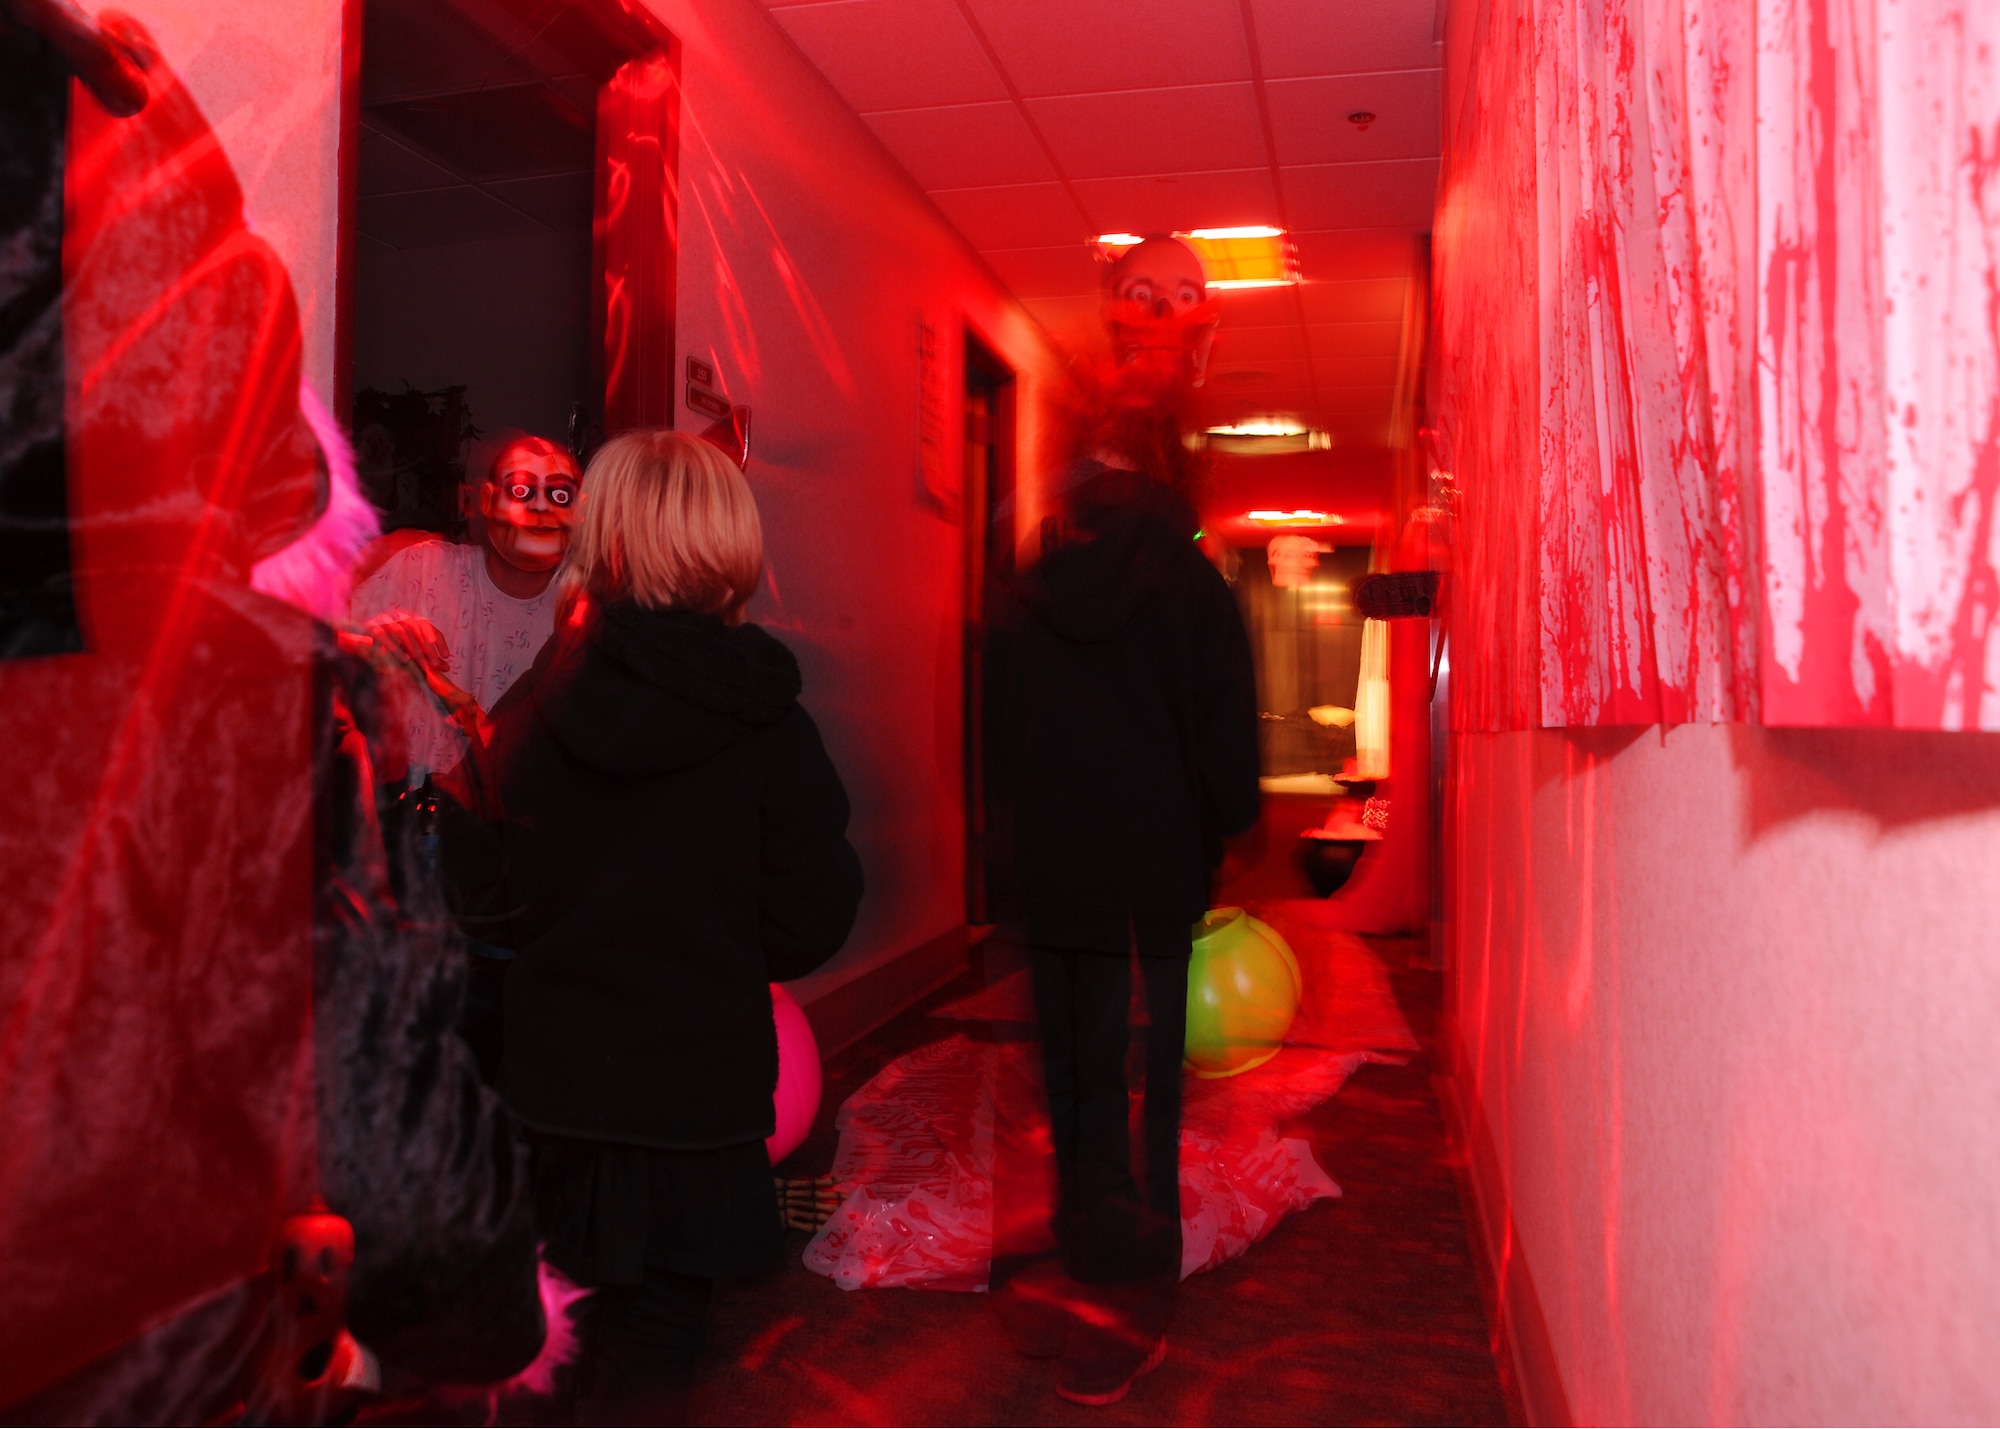 A group of children walk through the “Hades” hallway during the annual indoor trick-or-treating event Oct. 31, 2012, on Grand Forks Air Force Base, N.D. The 319th Medical Group hosts trick-or-treating every year as a way for children and families to enjoy the holiday. (U.S. Air Force photo/Airman 1st Class Xavier Navarro)